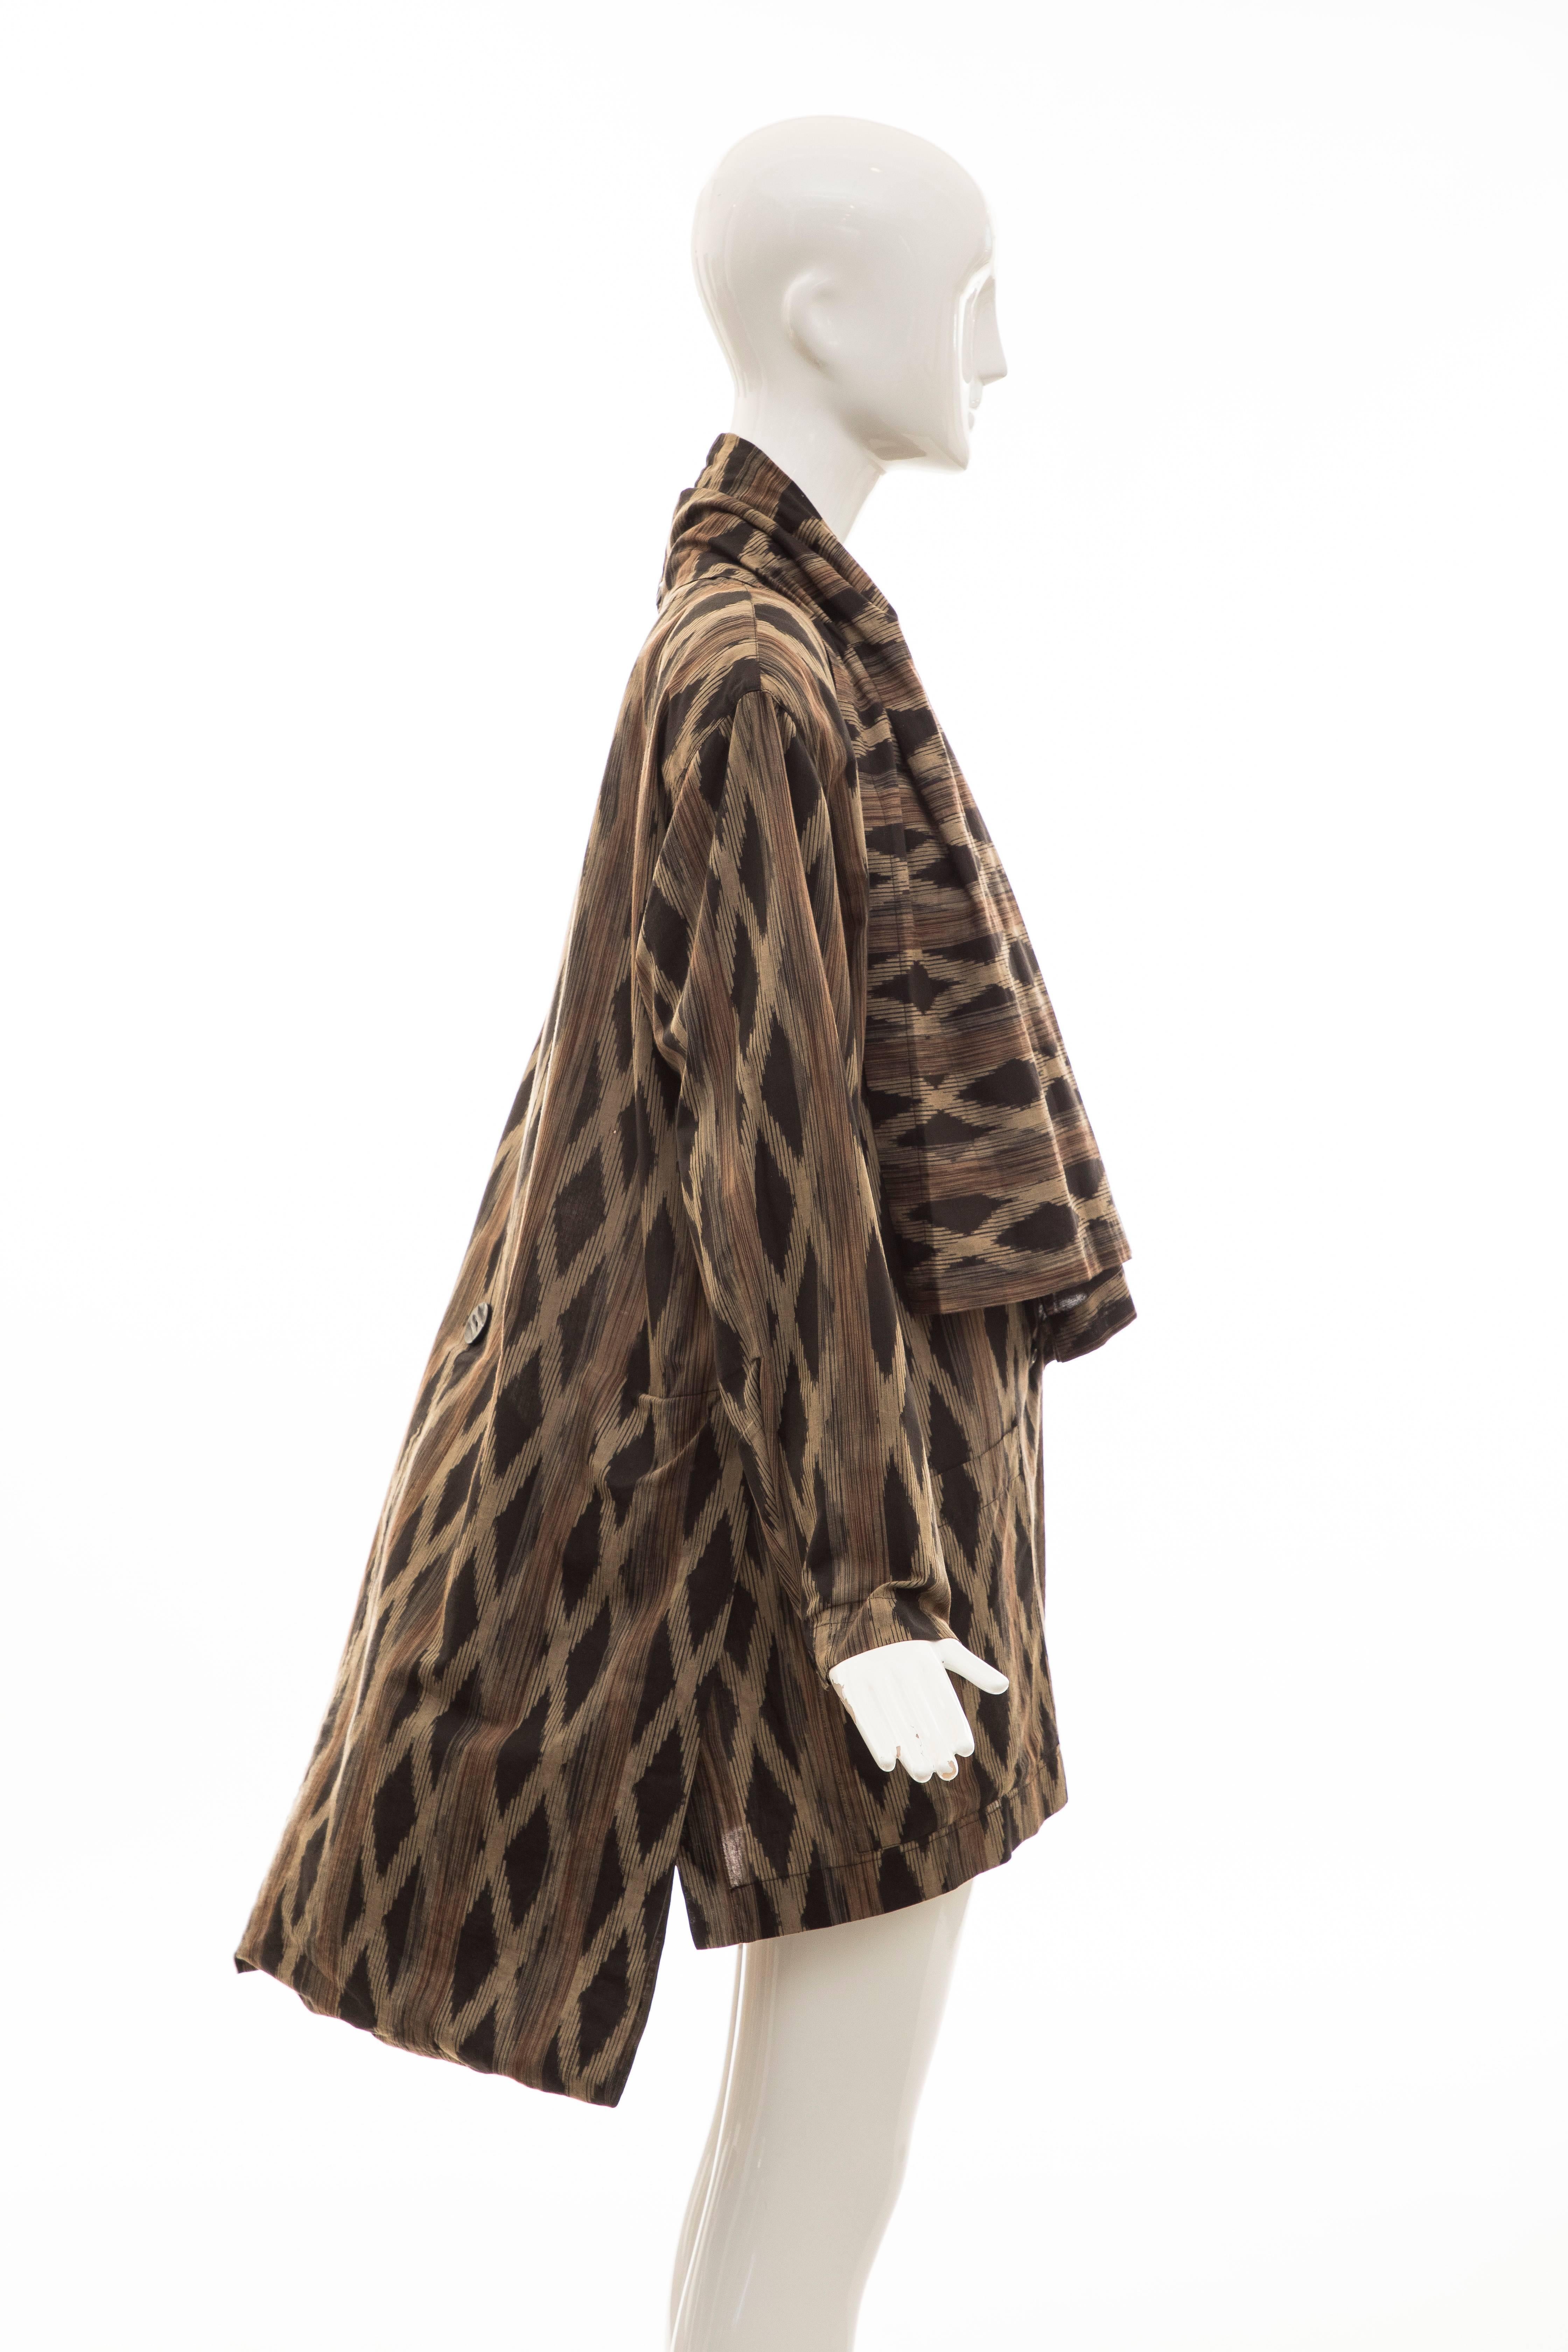 Issey Miyake Cotton Silk Lattice Weave Jacket Duster Cardigan, Fall 1986 For Sale 1